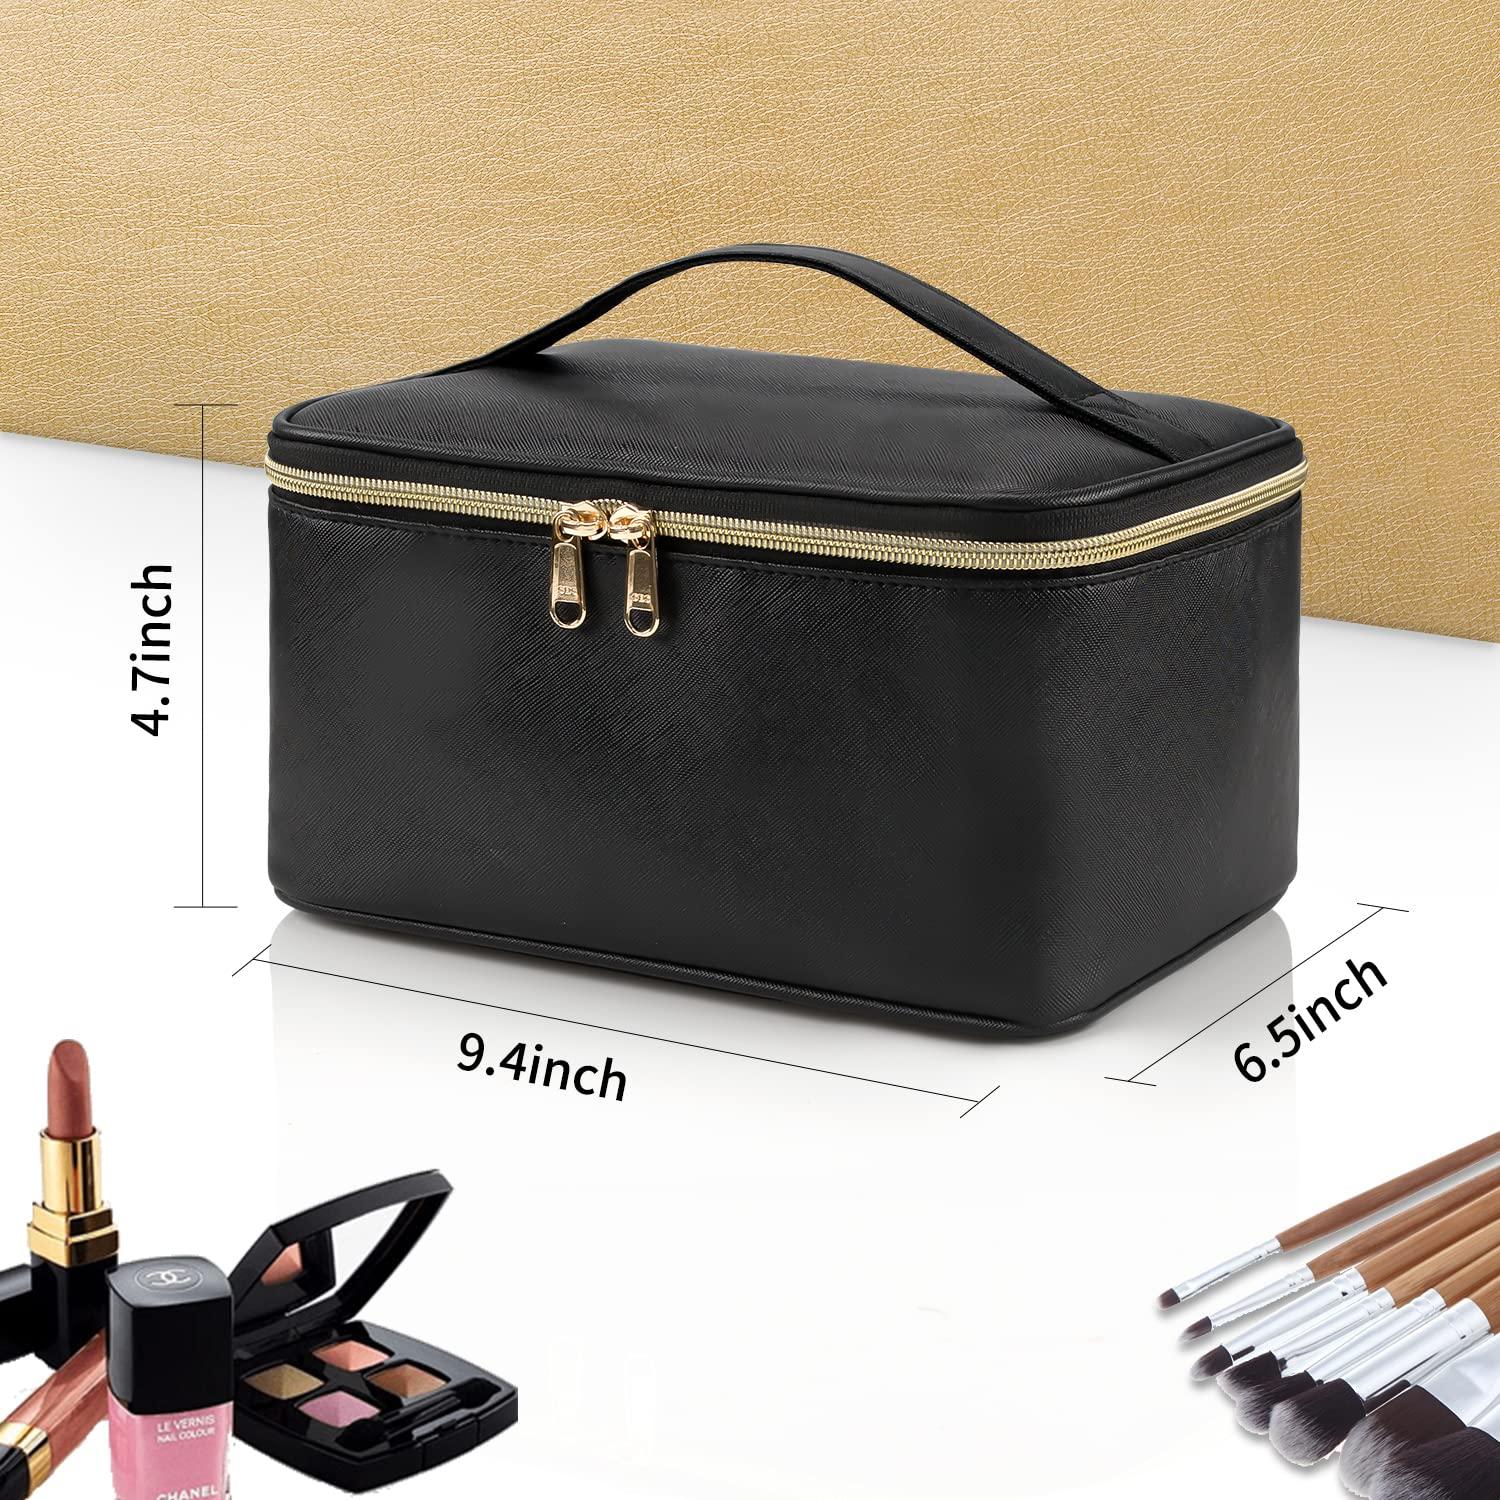 OCHEAL Makeup Bag, Cute Makeup Organizer Bag Potable Make up Bag for  Toiletry Cosmetics Accessories with Divider and Brushes Compartments,  Makeup